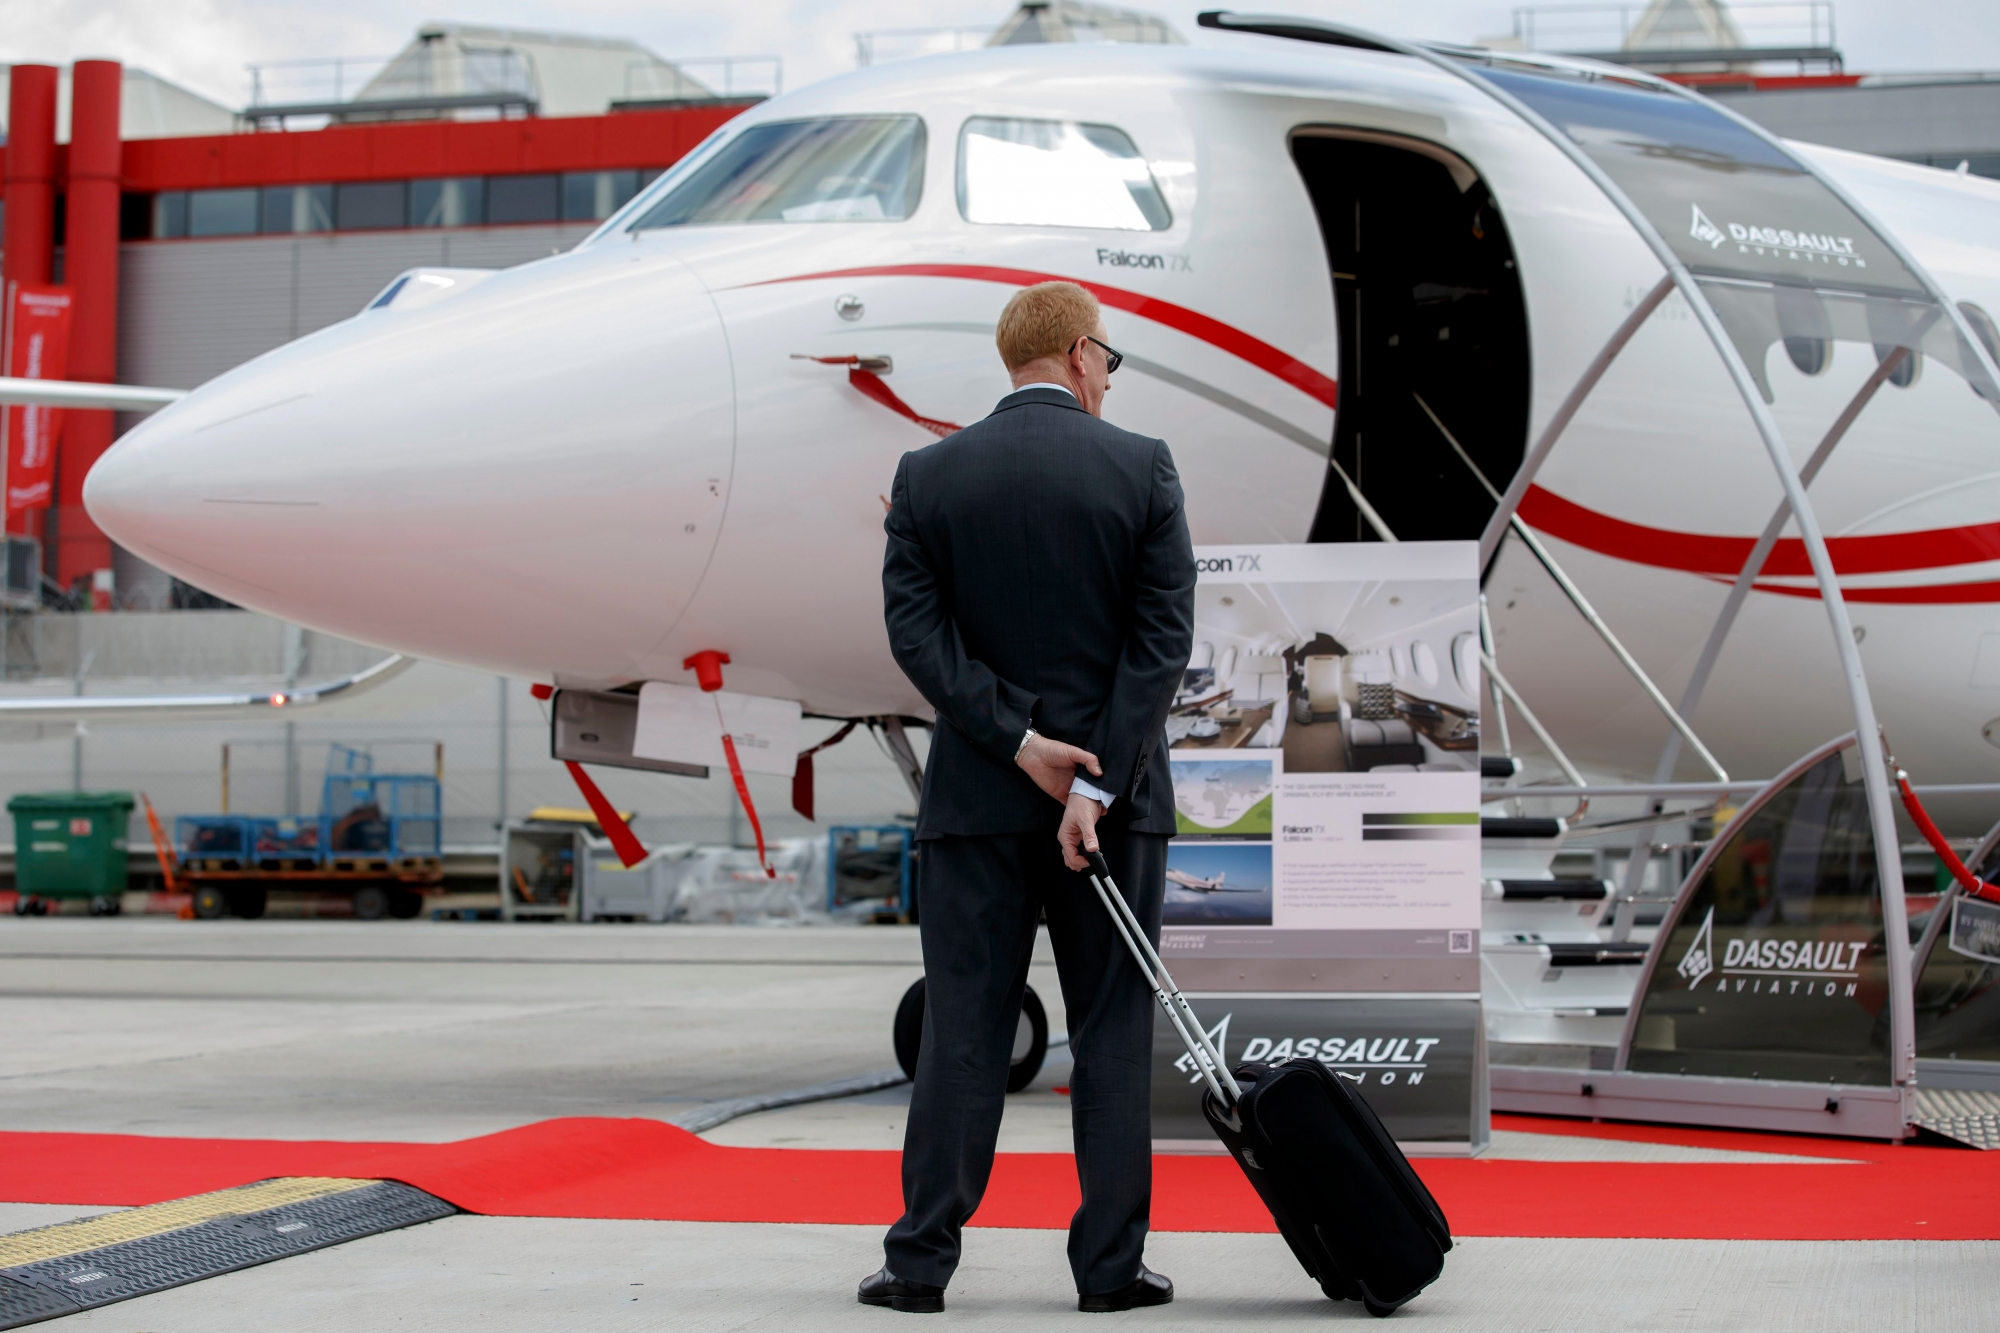 A visitor looks on an aircraft at the Dassault booth, during the 16th Annual European Business Aviation Convention and Exhibition, EBACE, at the Geneva Palexpo Conference Center located adjacent to the Geneva Airport in Geneva, Switzerland, Tuesday, May 24, 2016. (KEYSTONE/Salvatore Di Nolfi) SCHWEIZ LUFTFAHRT MESSE EBACE 2016